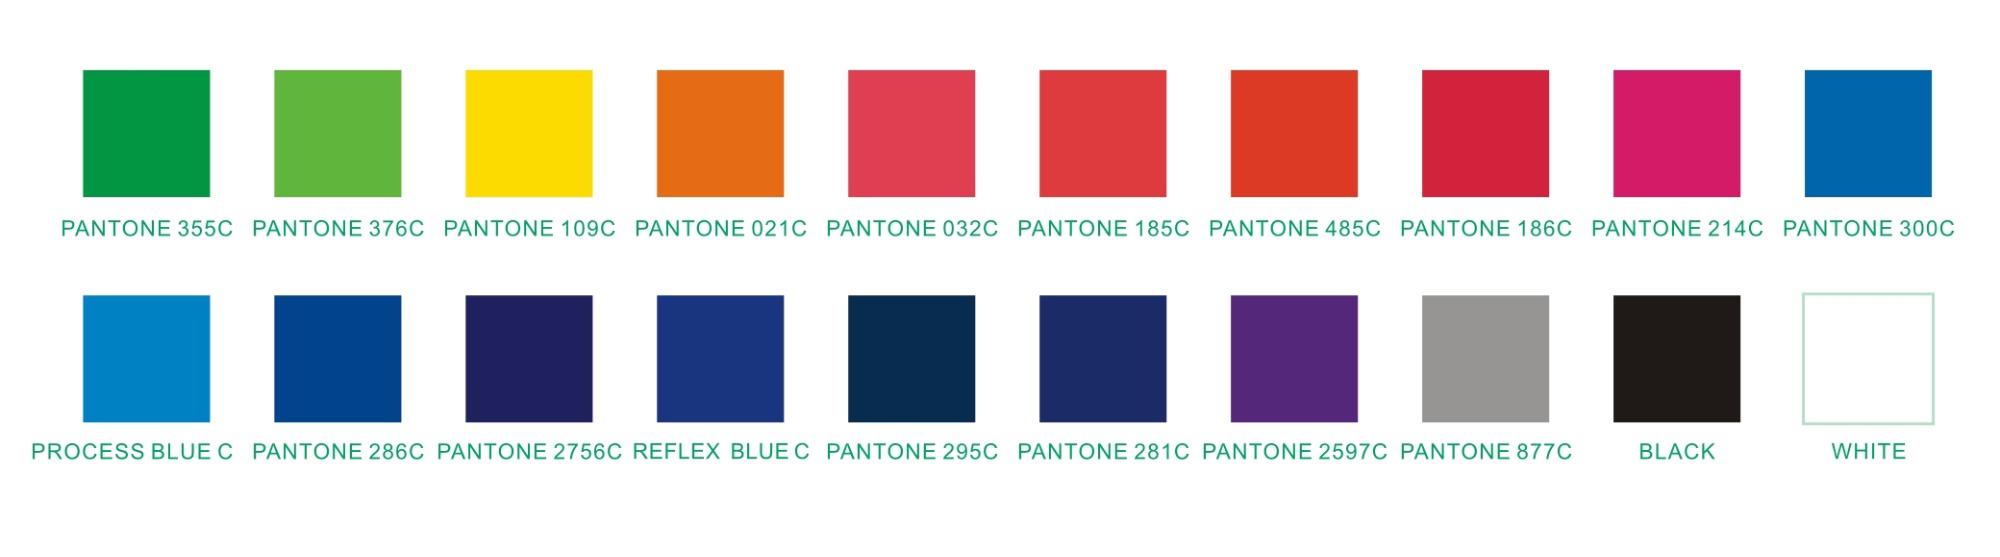 Lanyards color options